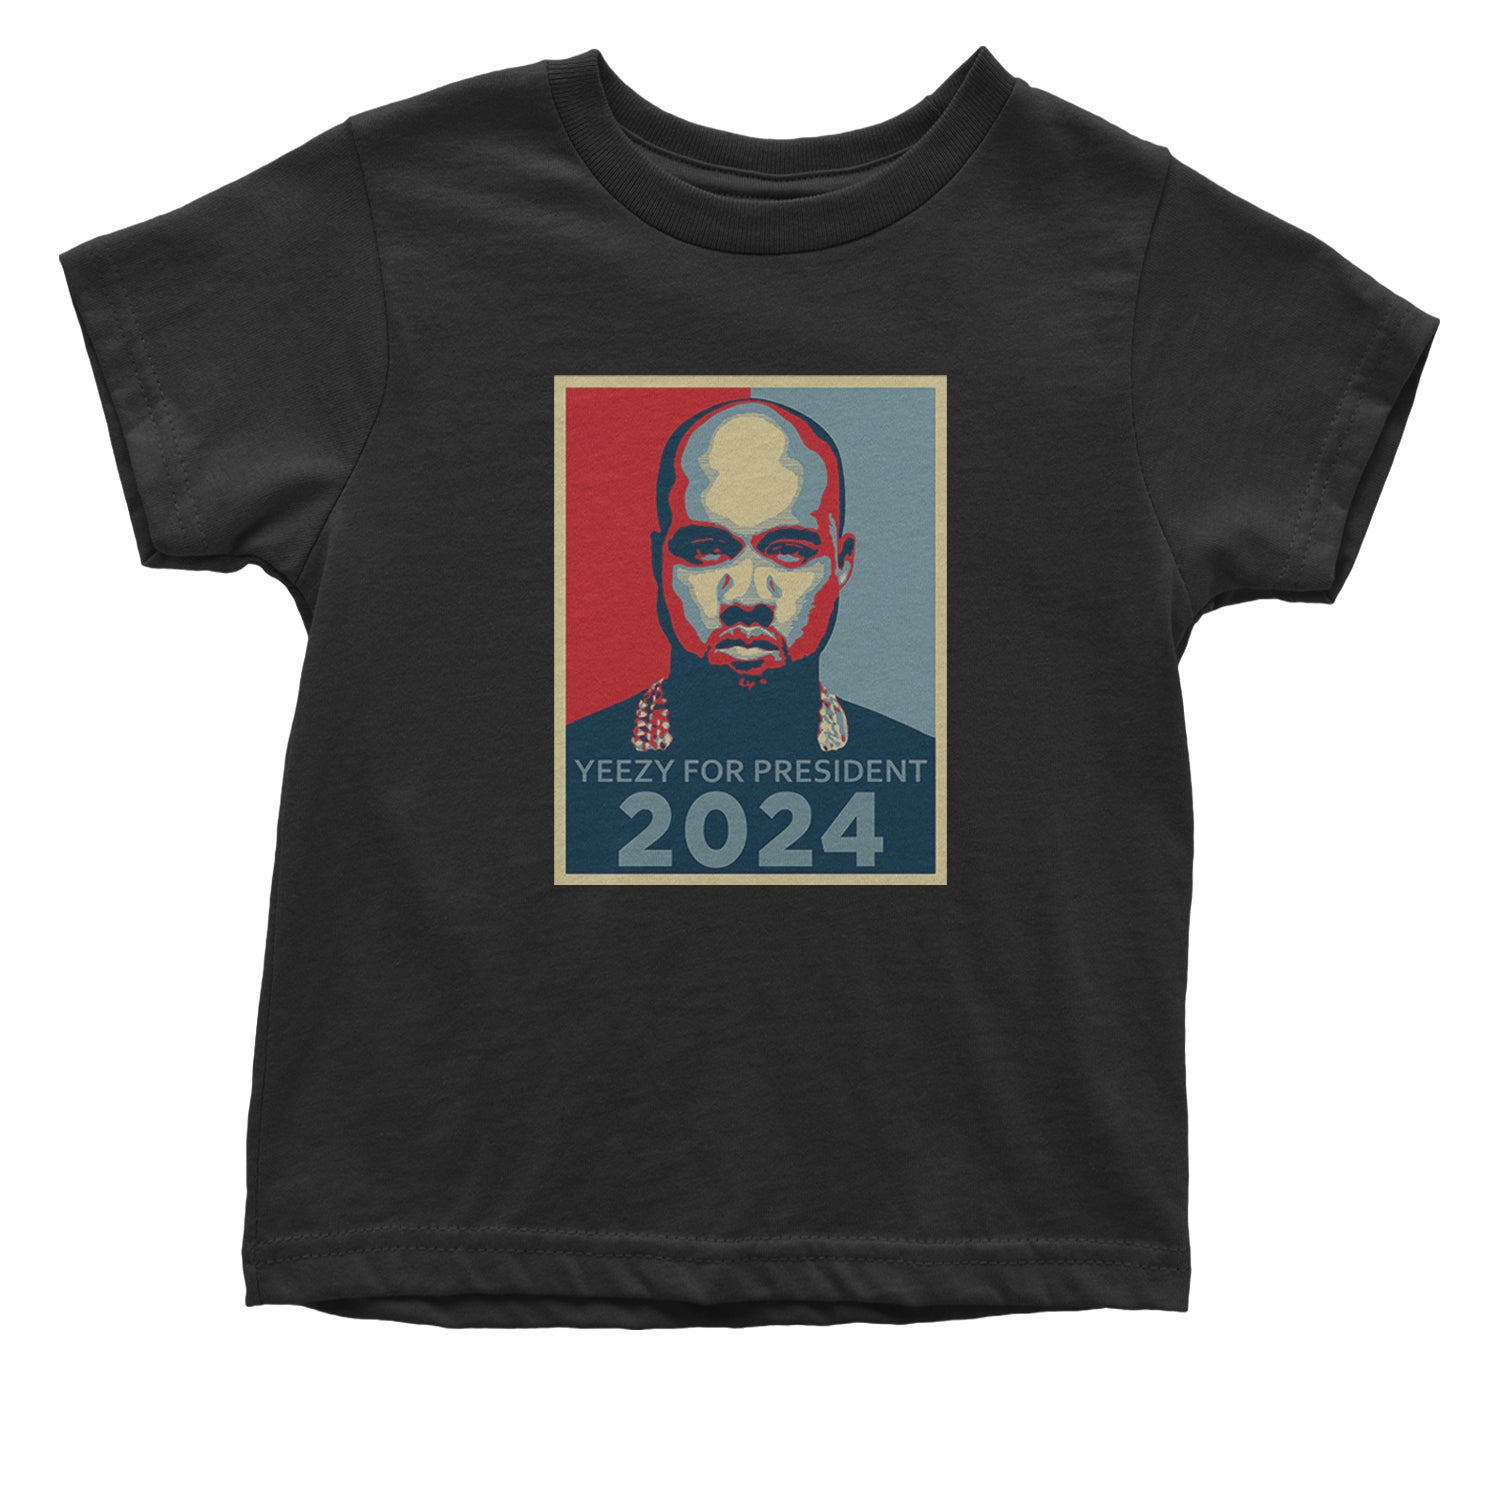 Yeezus For President Vote for Ye Infant One-Piece Romper Bodysuit and Toddler T-shirt Black